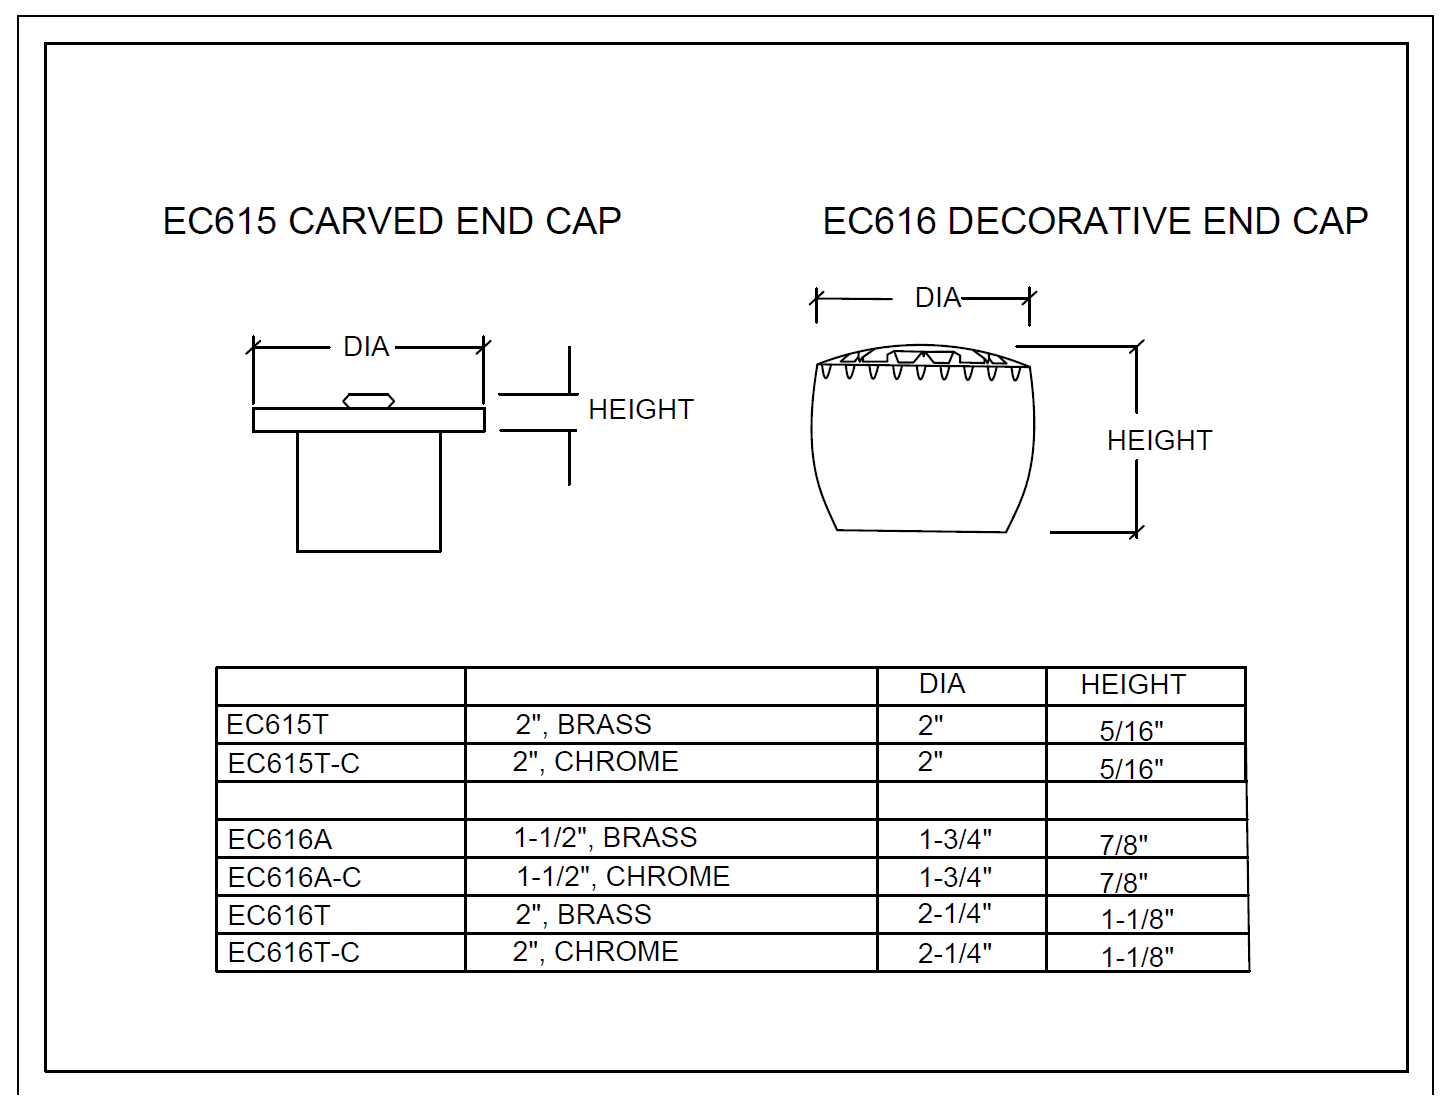 Decorative End Cap 2" - All finishes